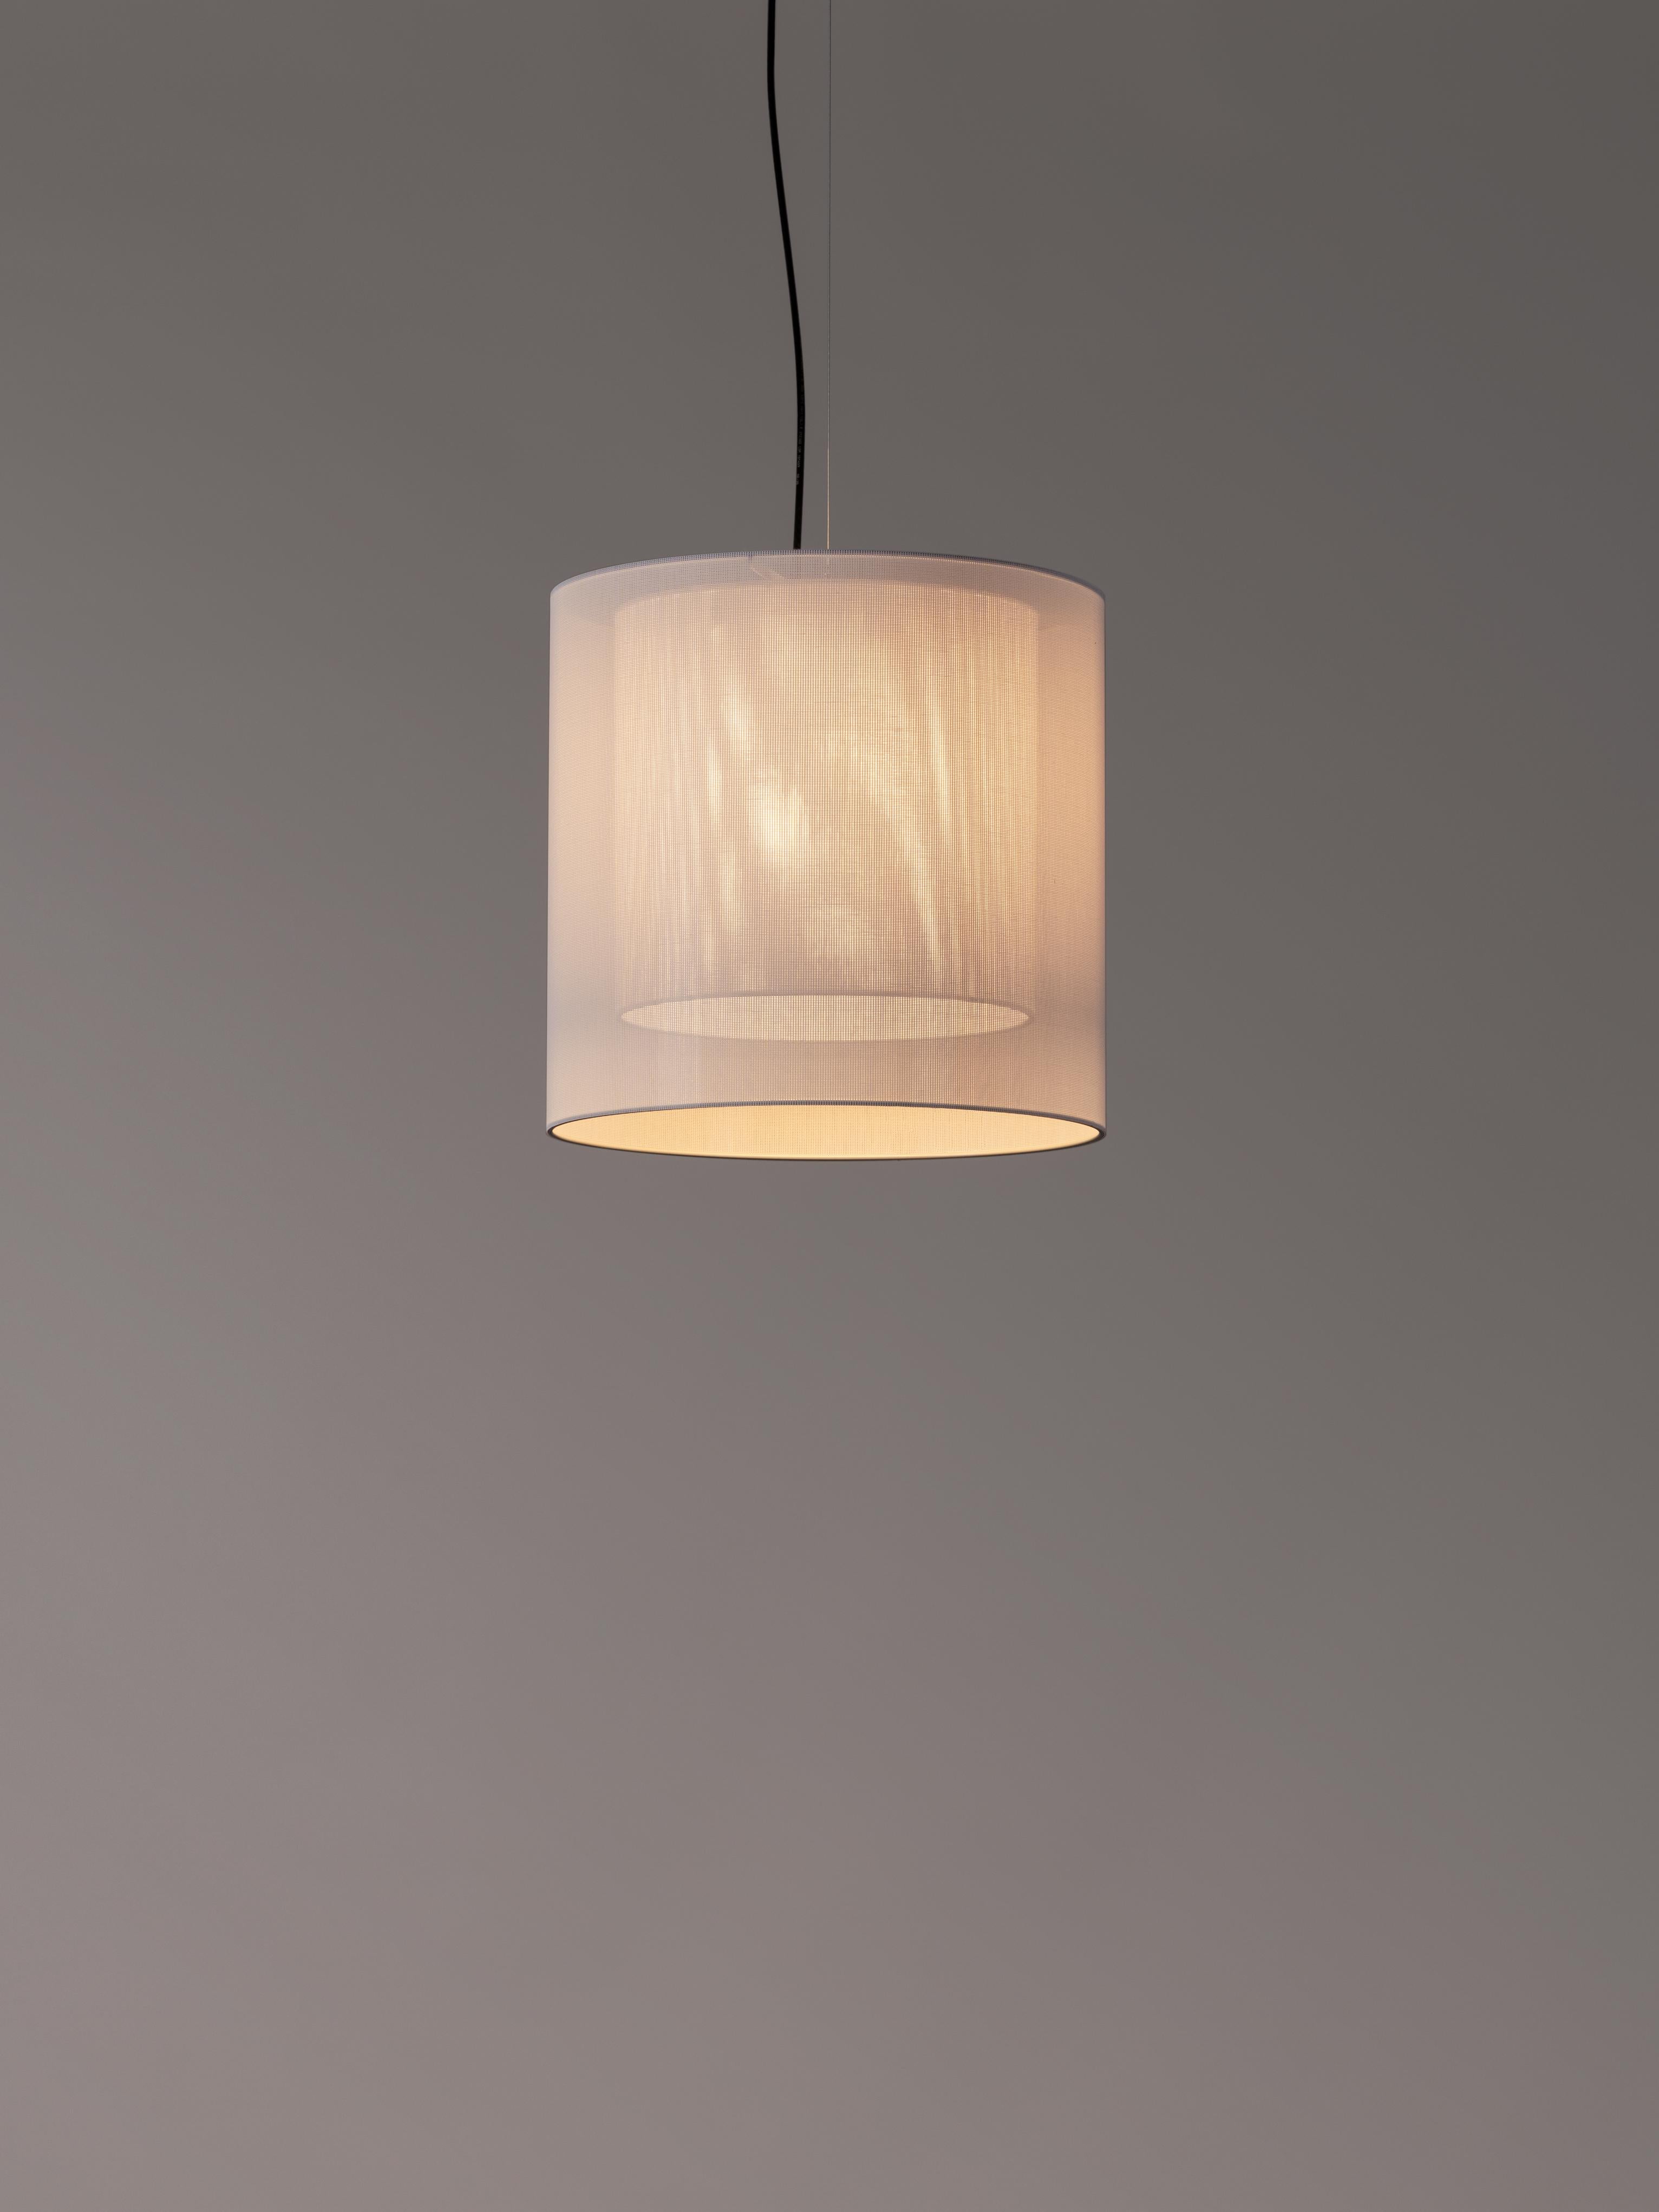 White Moaré MS pendant lamp by Antoni Arola
Dimensions: D 46 x H 45 cm
Materials: Metal, polyester.
Available in other colors and sizes.

Moaré’s multiple combinations of formats and colours make it highly versatile. The series takes its name